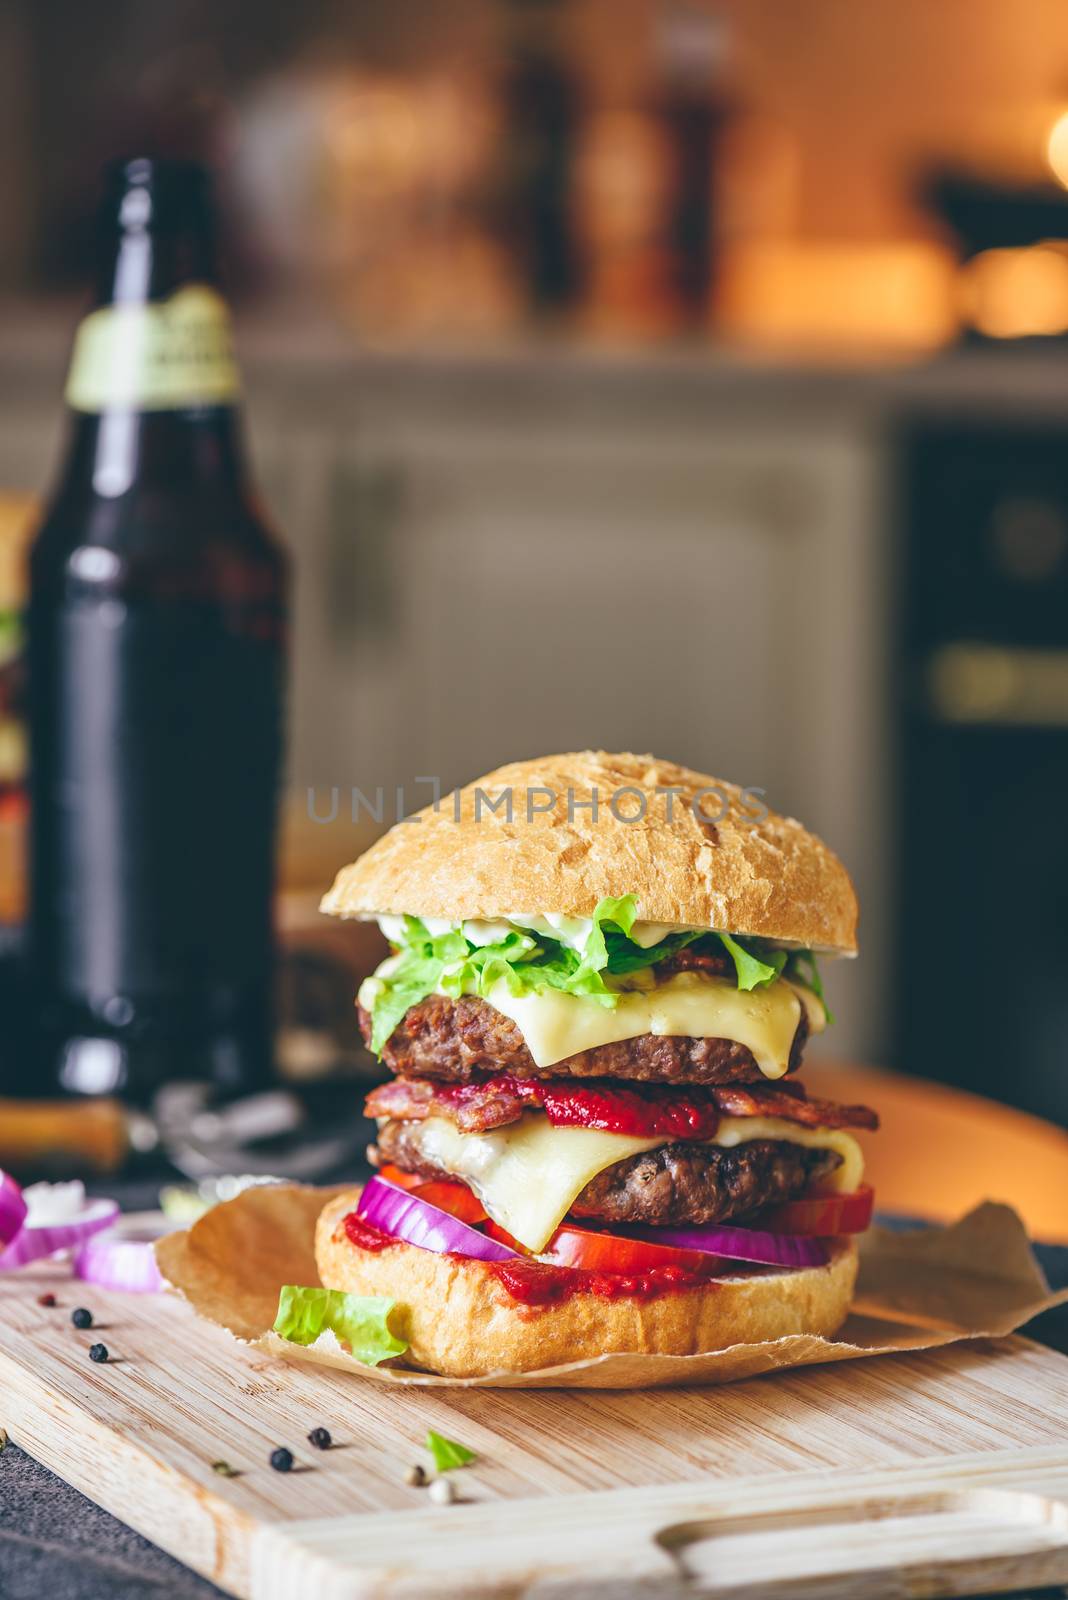 Cheeseburger with Bottle of Beer by Seva_blsv